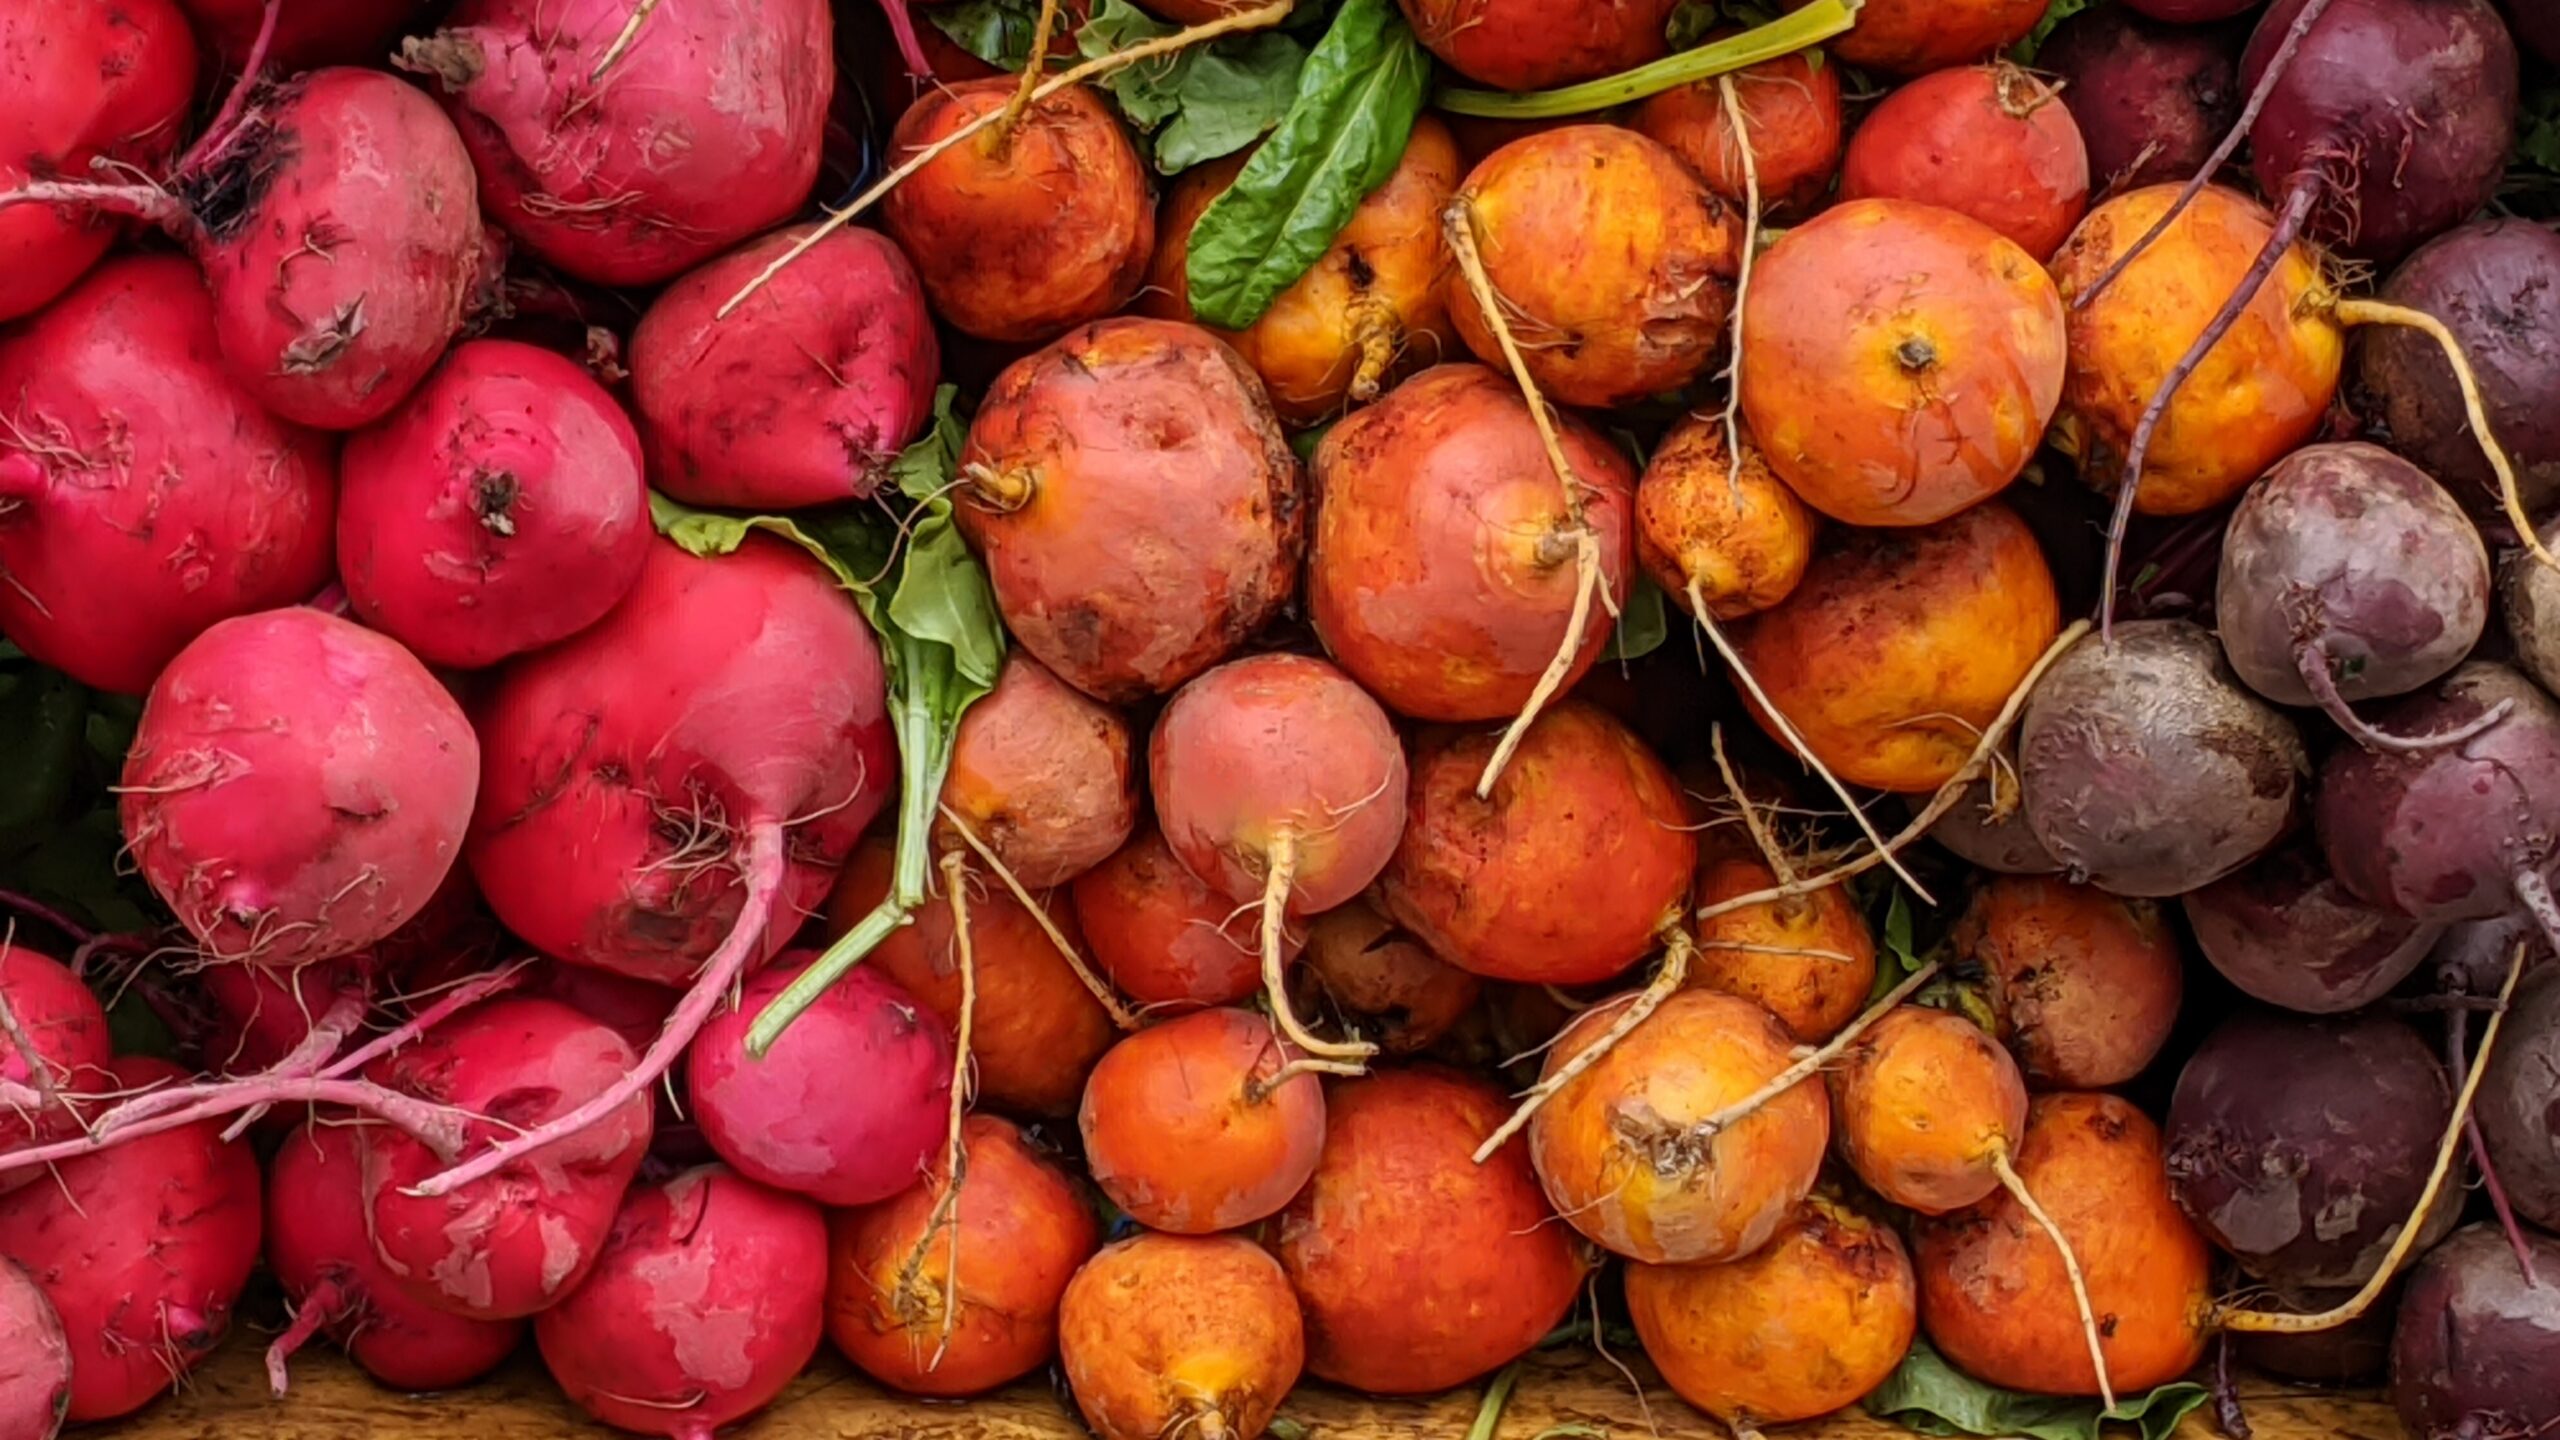 Image of red, orange, and purple beets